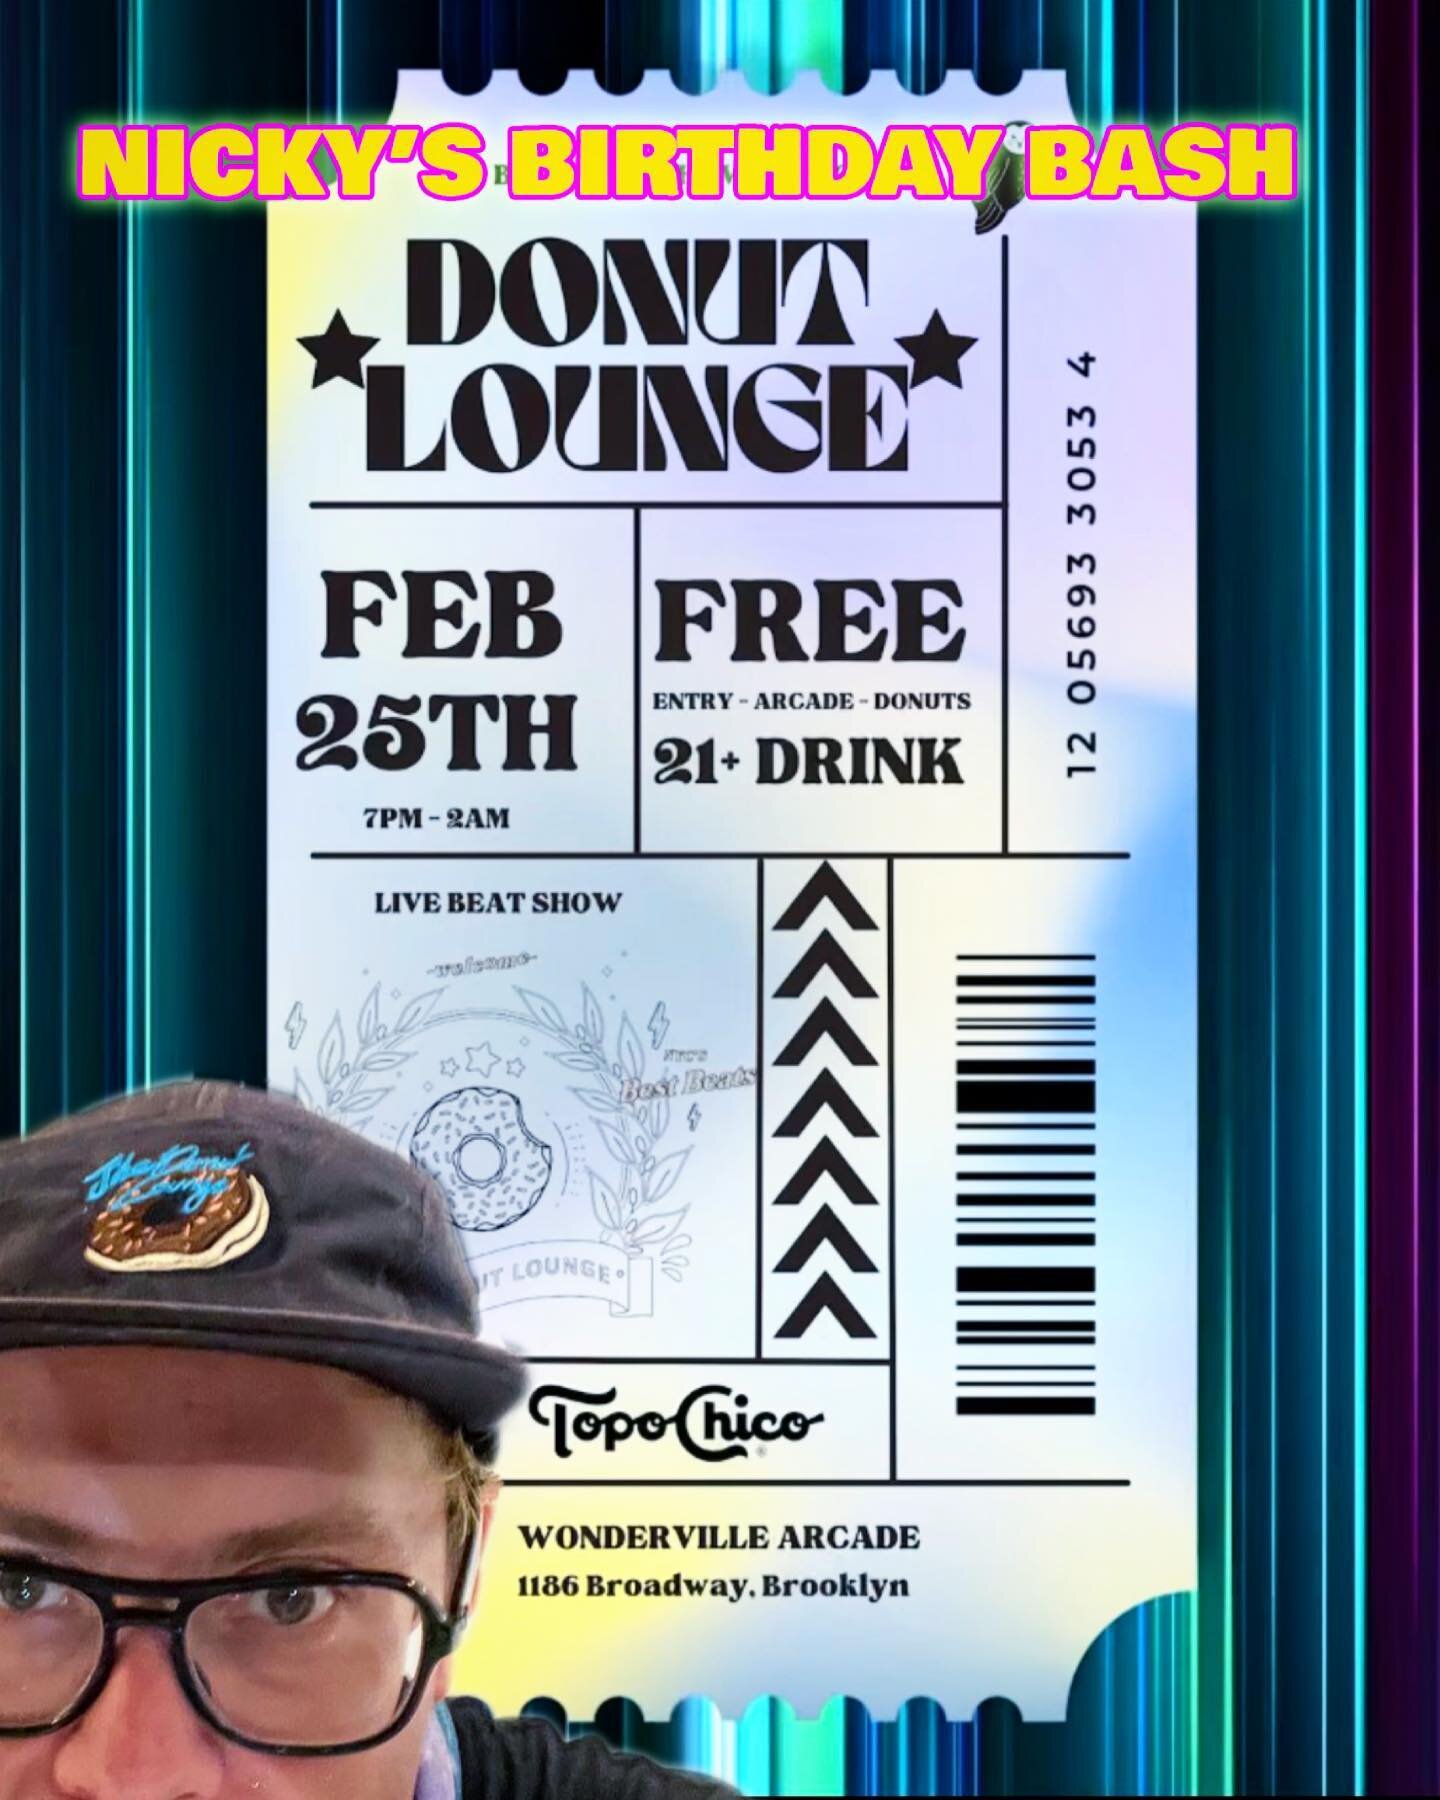 Tomorrow, friends and family, in NYC will be my birthday celebration at @wondervillenyc for @donutlounge_ !!! Anyone who hasn&rsquo;t been able to make to a DL before now should feel extra pressure since it&rsquo;s also my birthday!